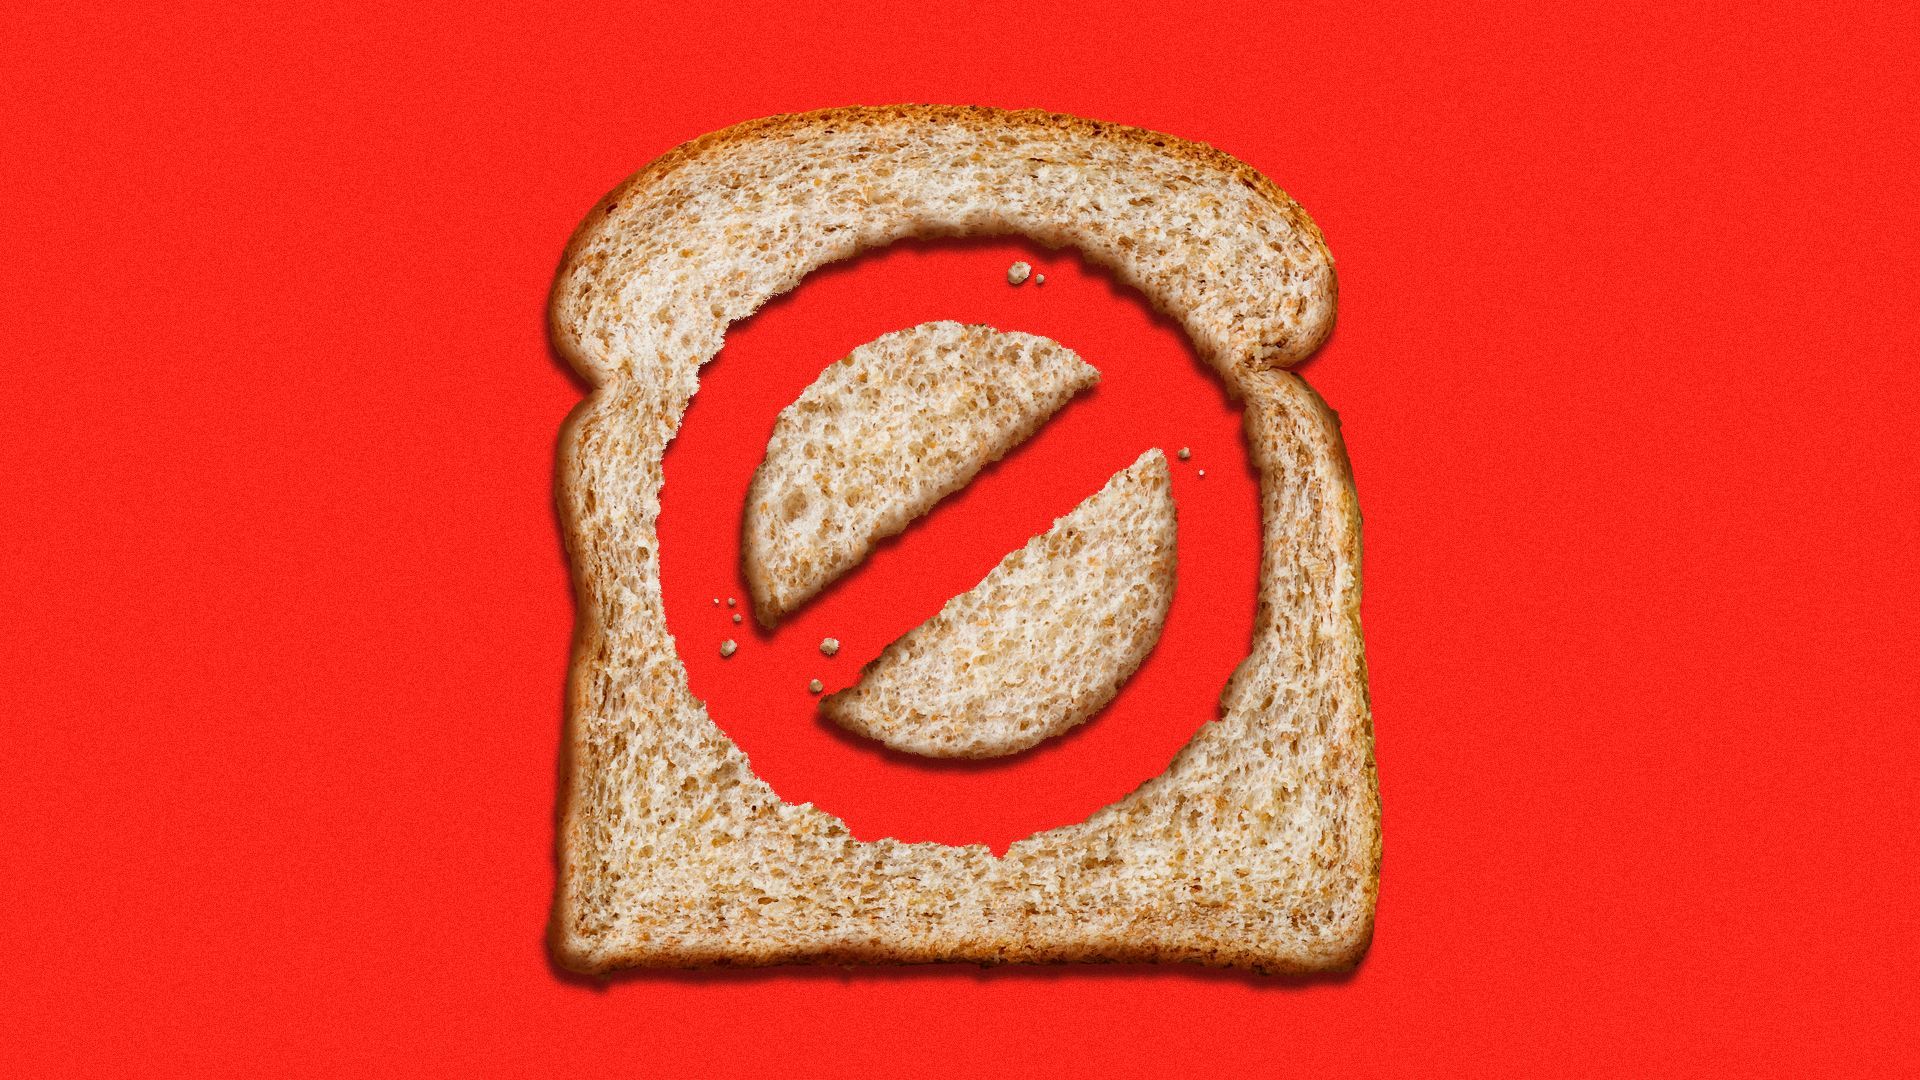 Illustration of a slice of bread with a "no" sign cut out of the middle